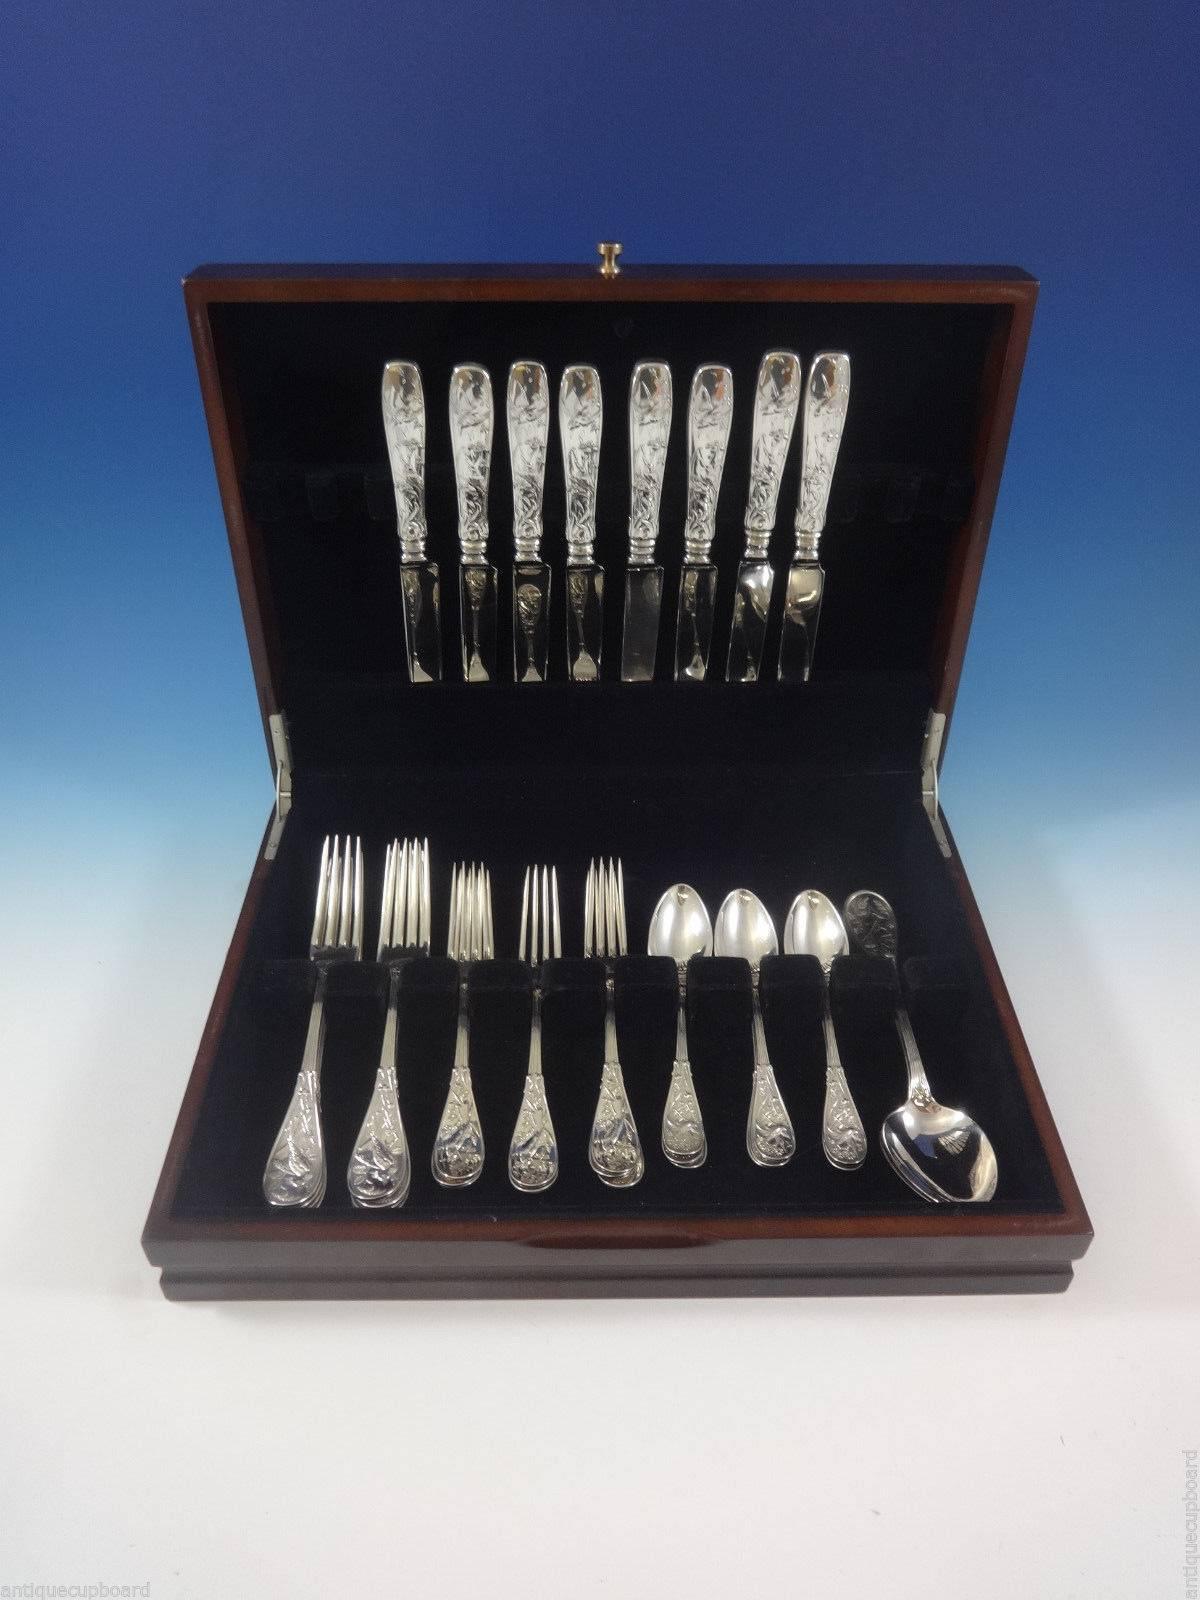 Japanese by Tiffany & Co. sterling silver flatware set 34 pieces. This set includes: 

Eight knives, 9 1/4